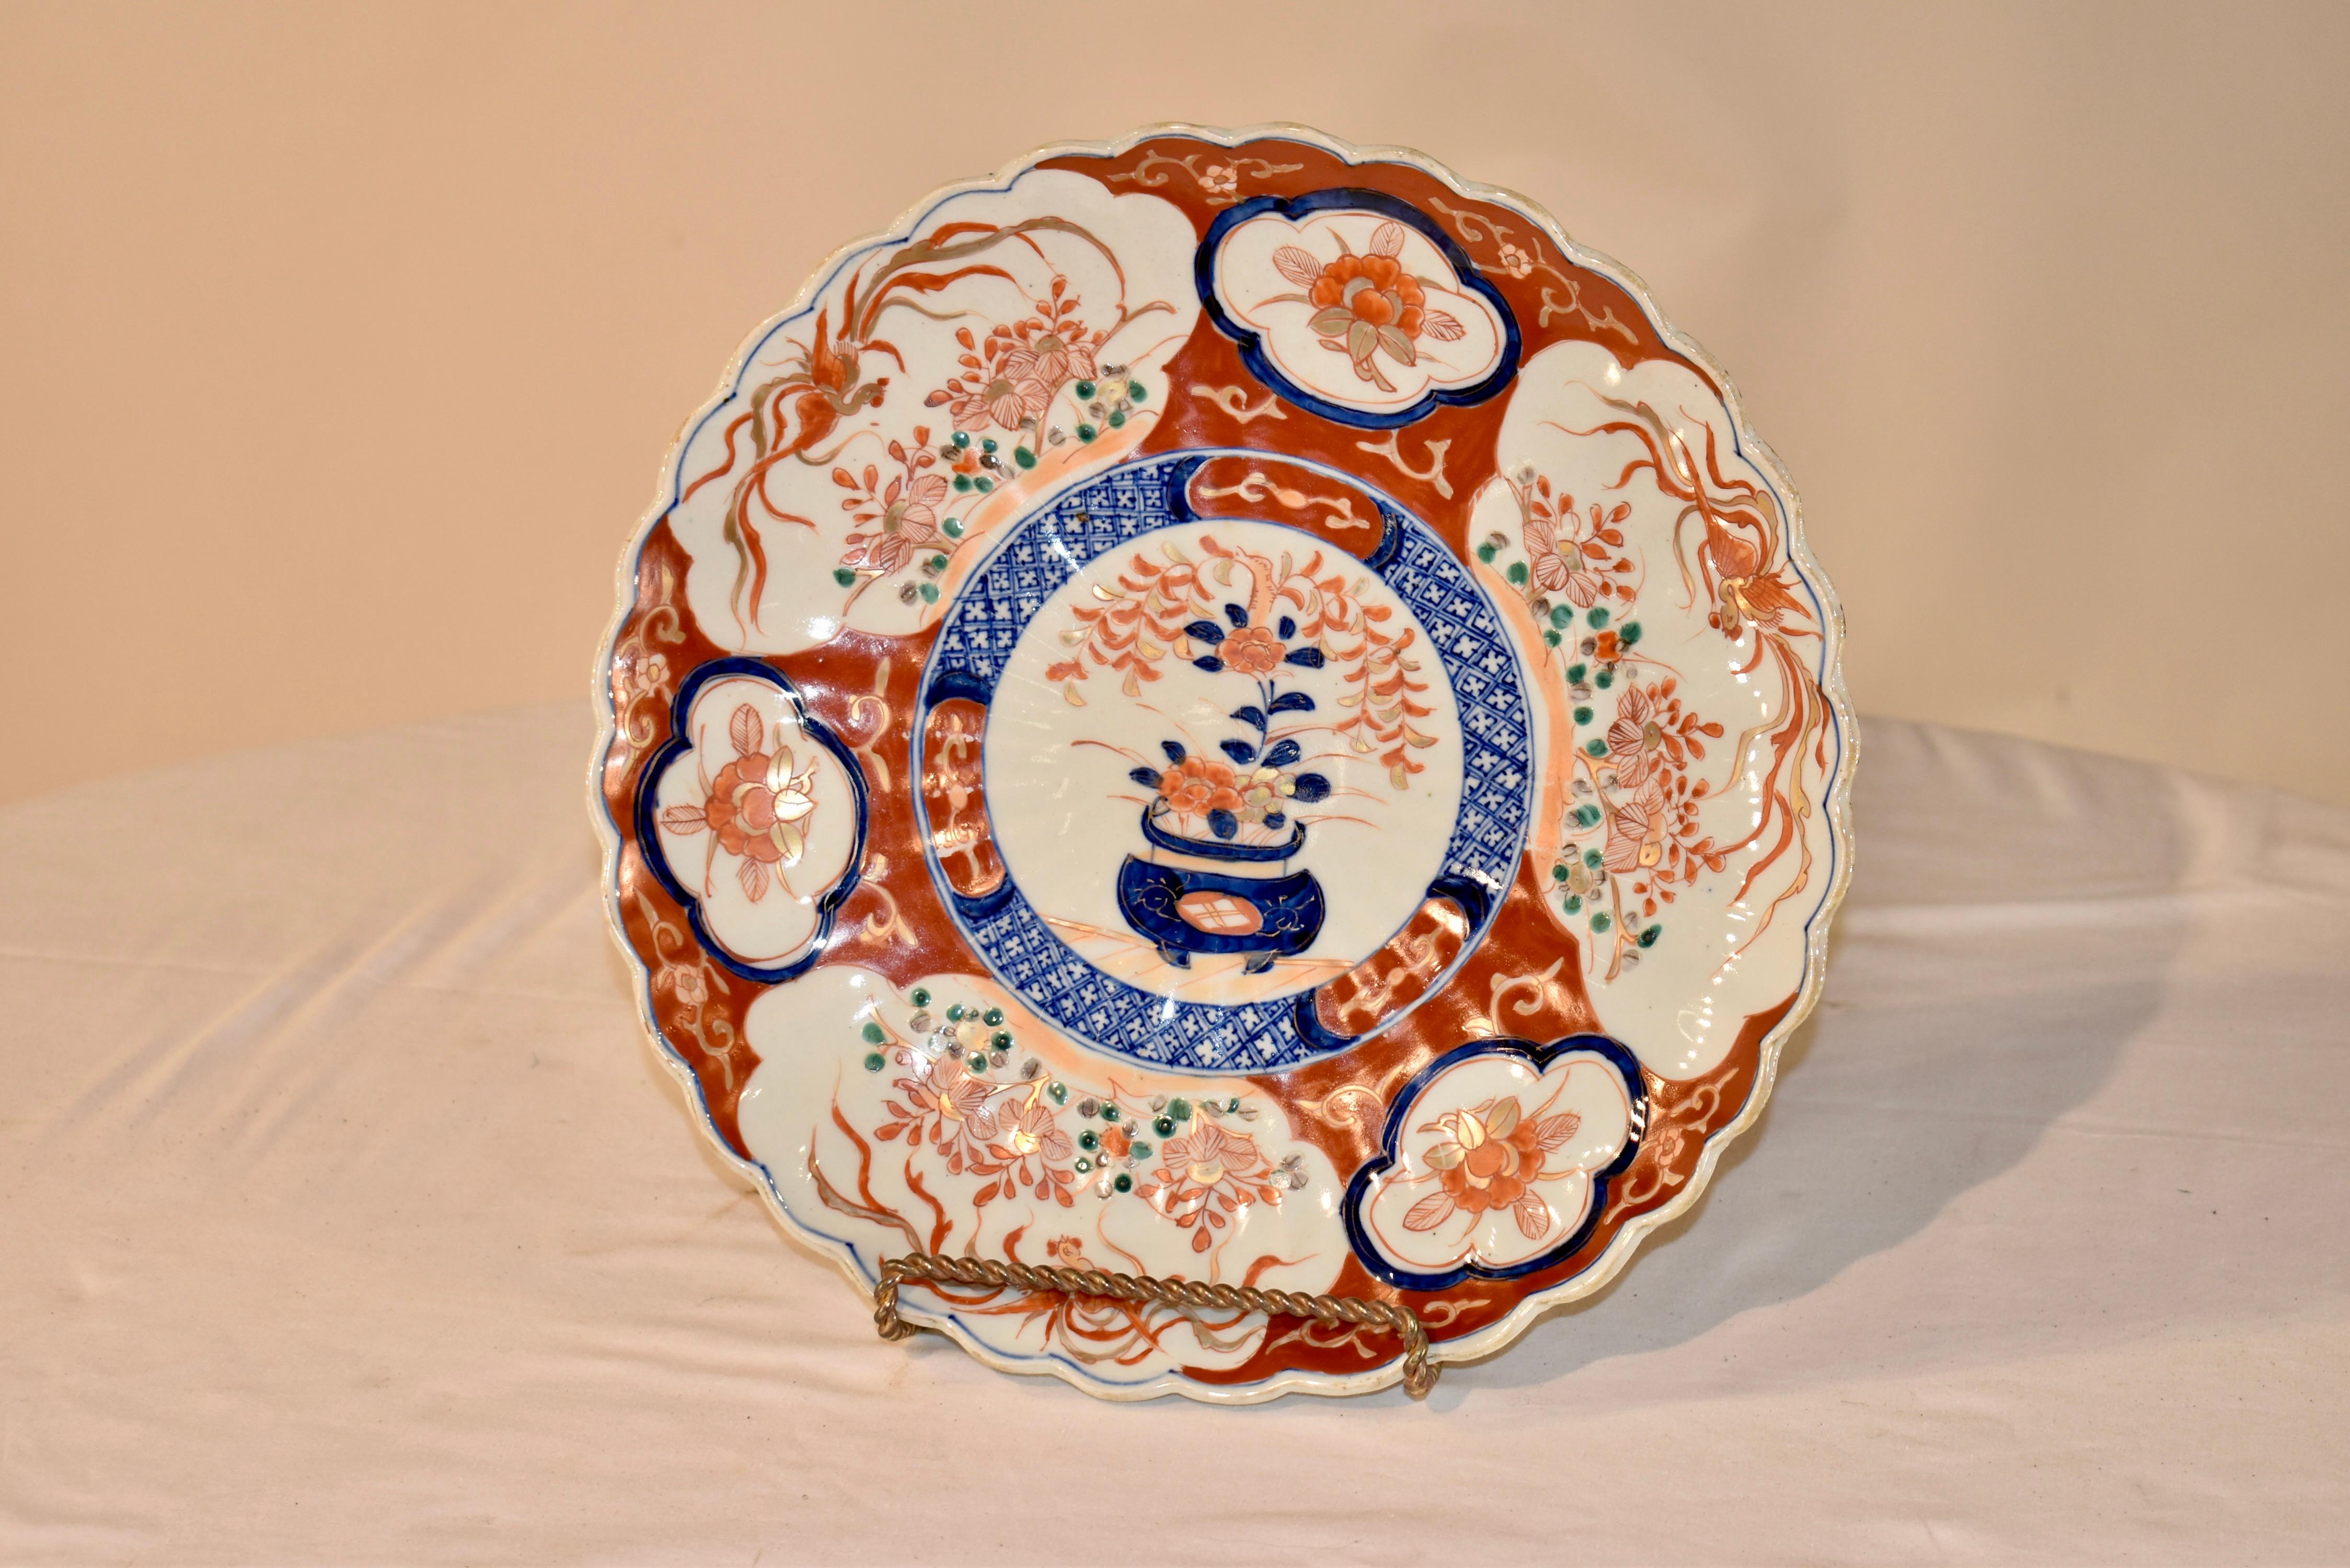 Circa 1900 Imari charger from Japan with a central medallion, containing a hand painted picture of a potted plant, surrounded by three larger medallions containing florals and birds.  These medallions are separated by smaller medallions with floral